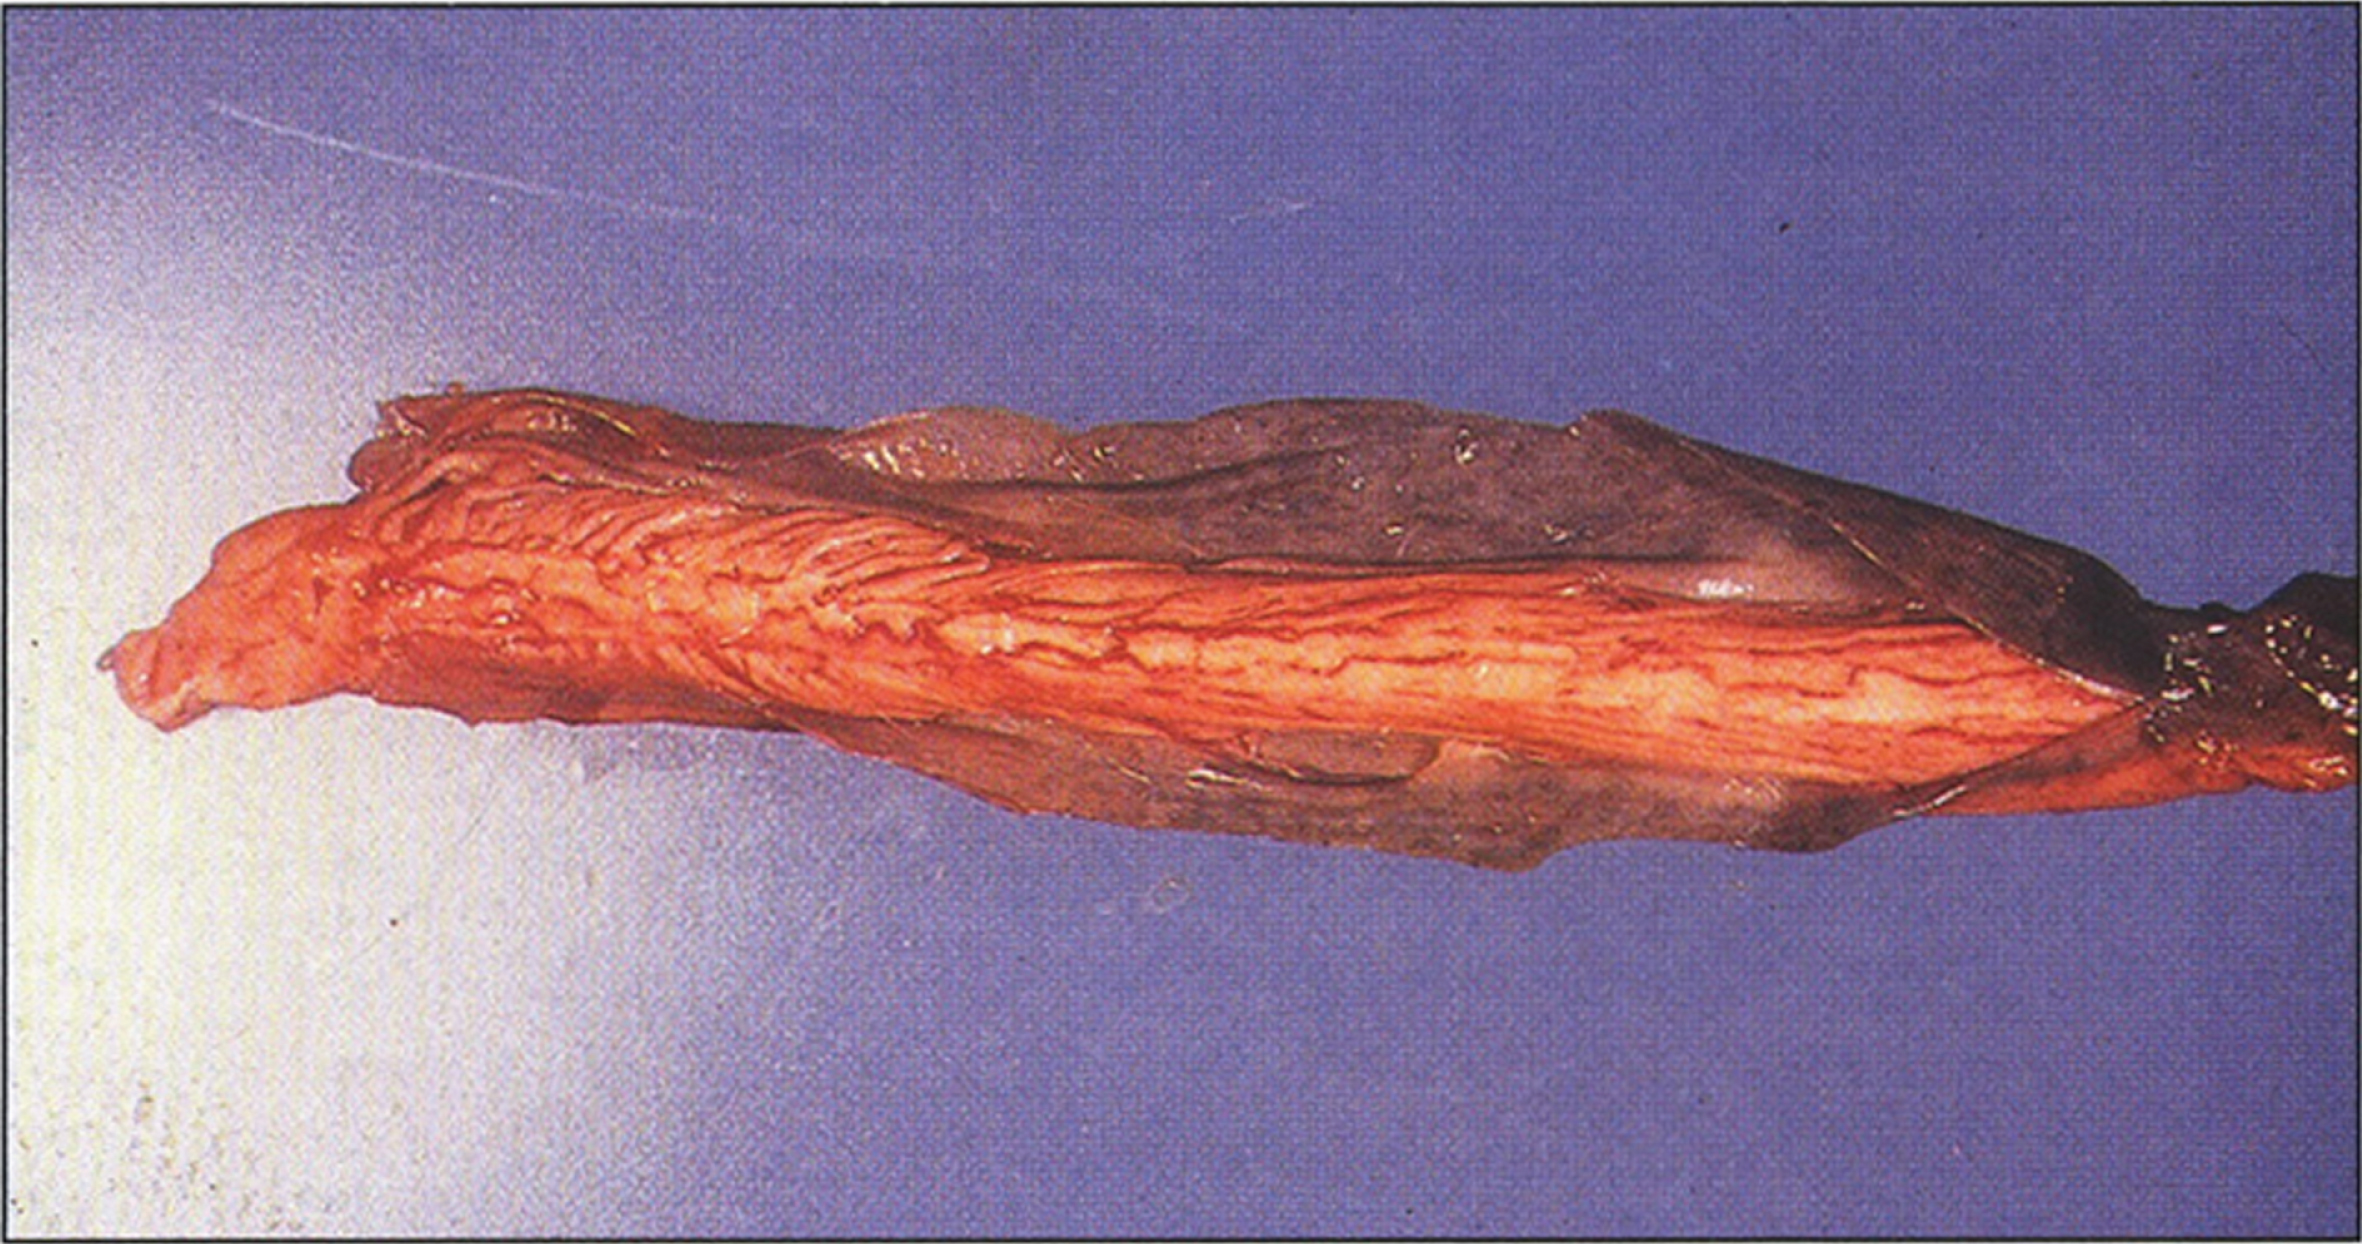 Alkaptonuria- A segment of the spinal cord covered by densely pigmented dura mater. (Figure 18 in the first book).